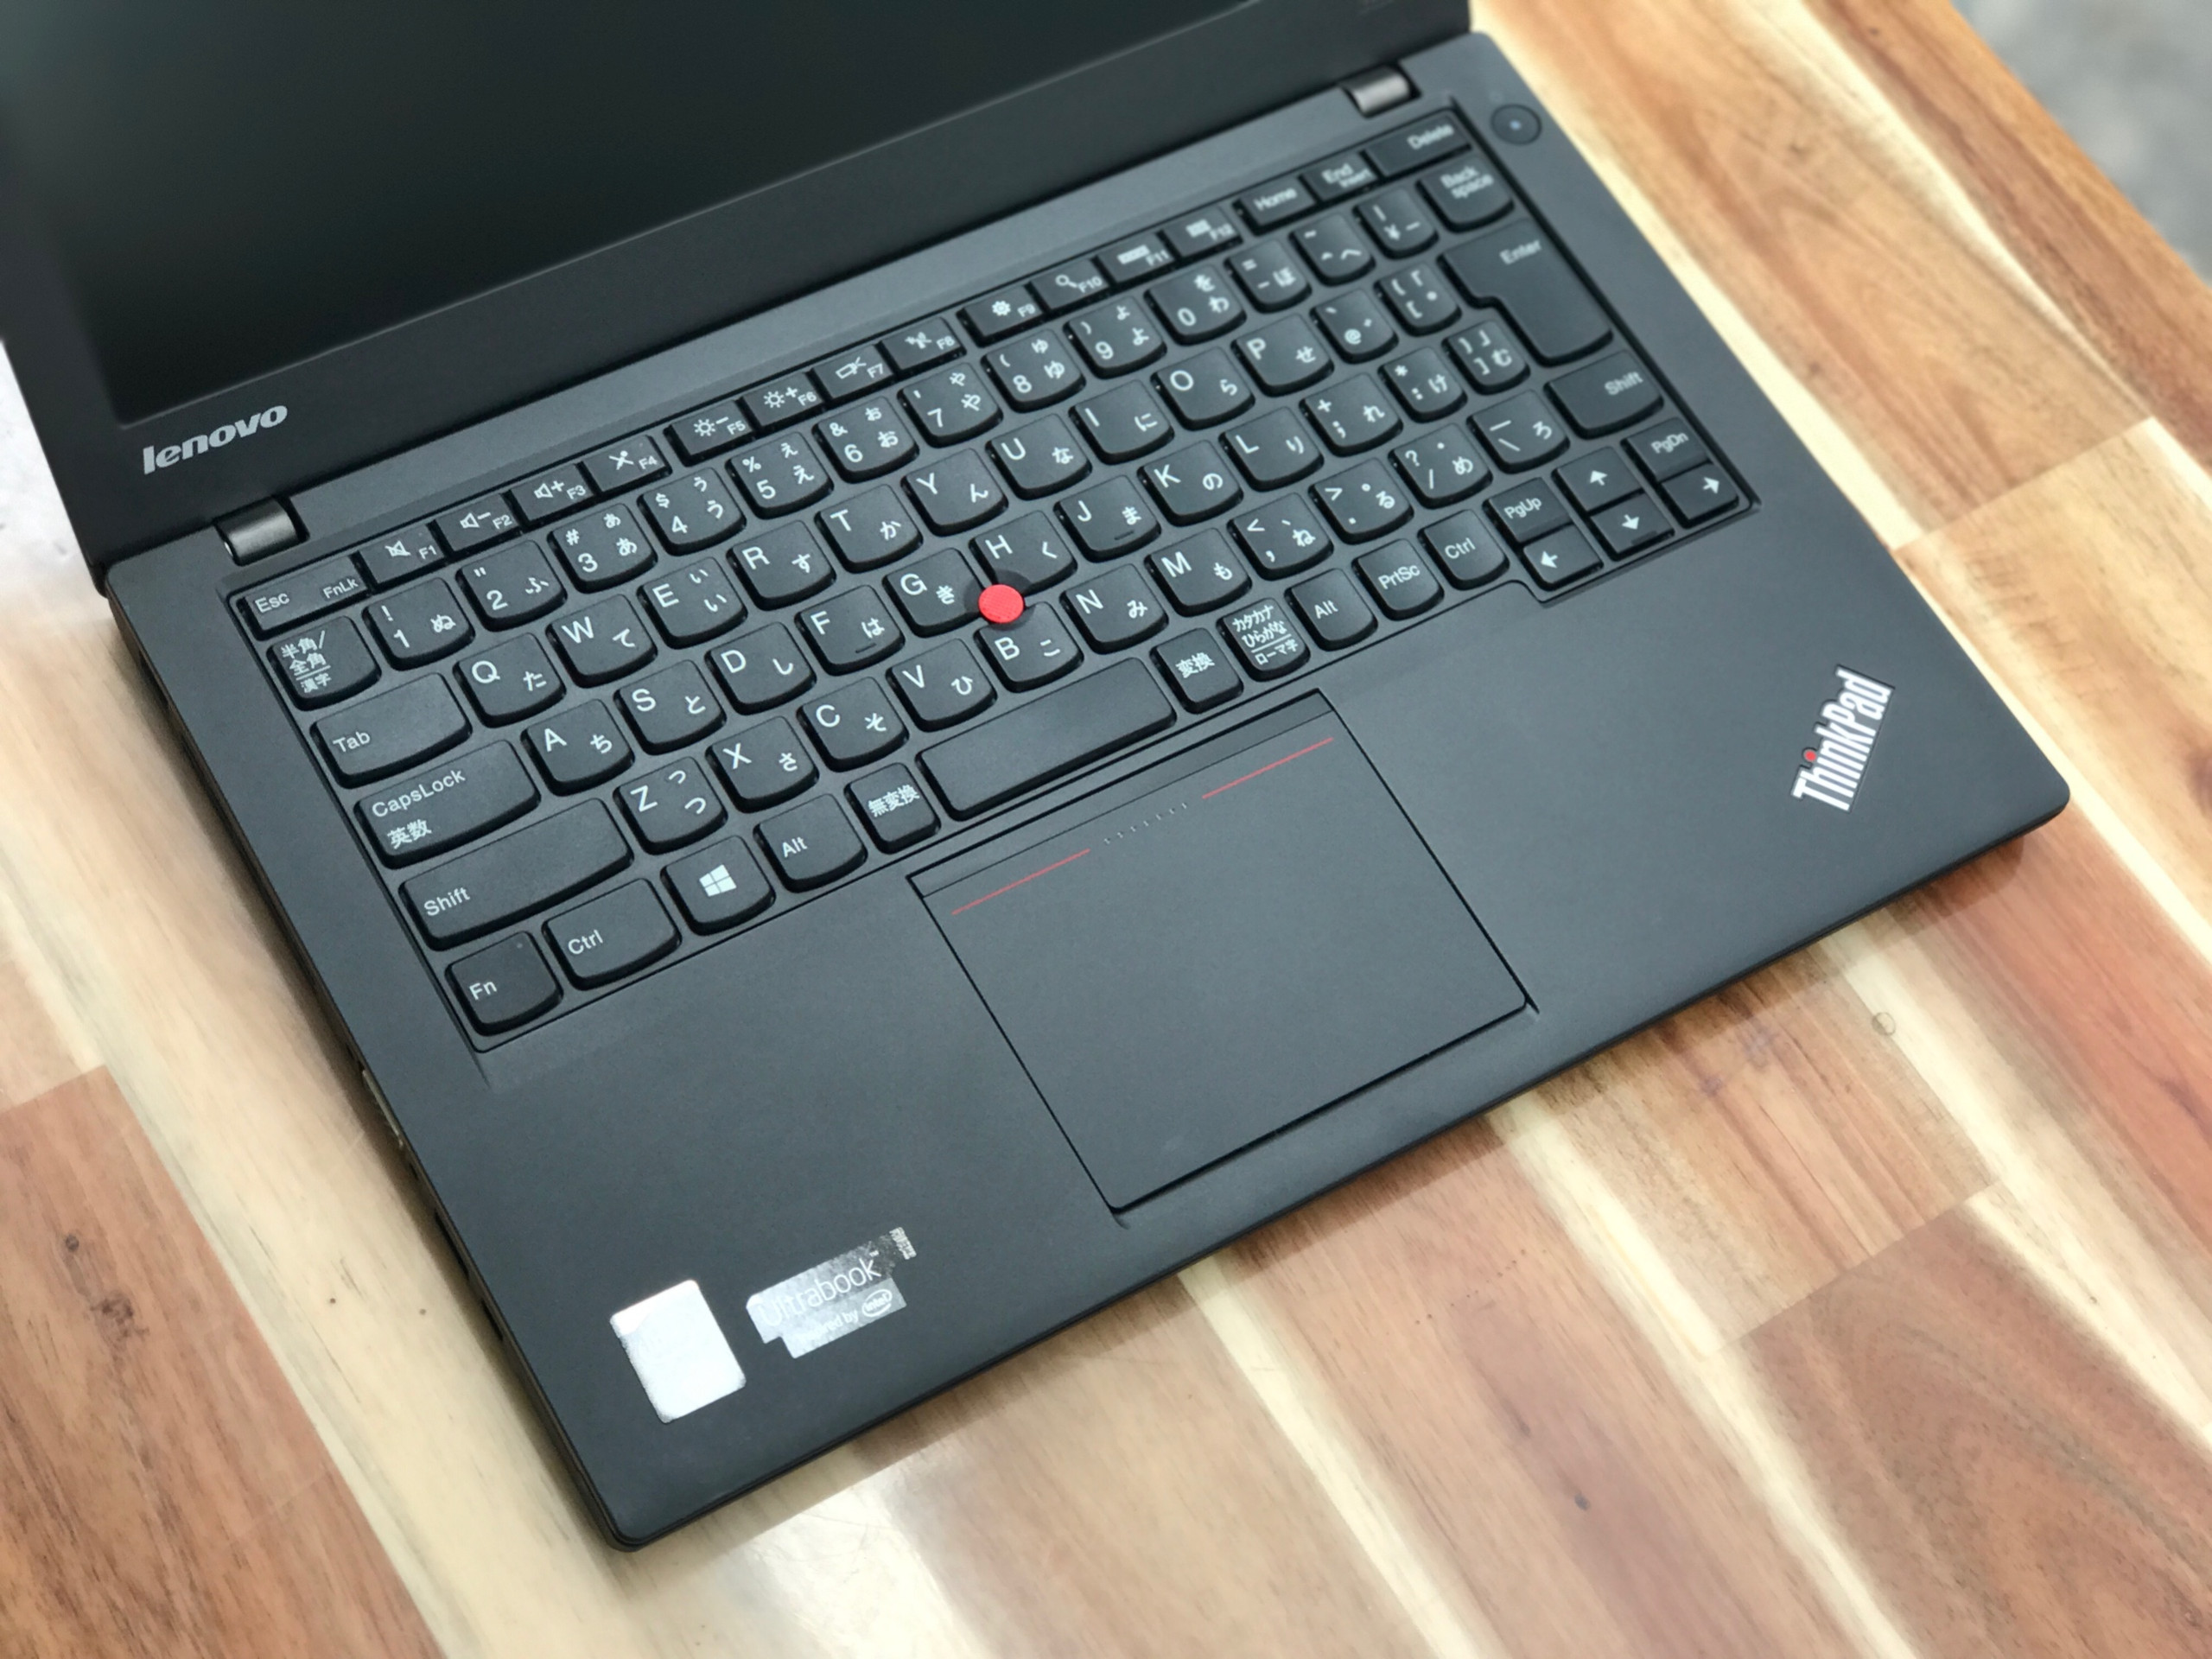 Laptop Lenovo Thinkpad X240/ Core i7 Haswell/ 4G/ SSD128 -500G/ 12/5in/ Win 10/ Giá rẻ1